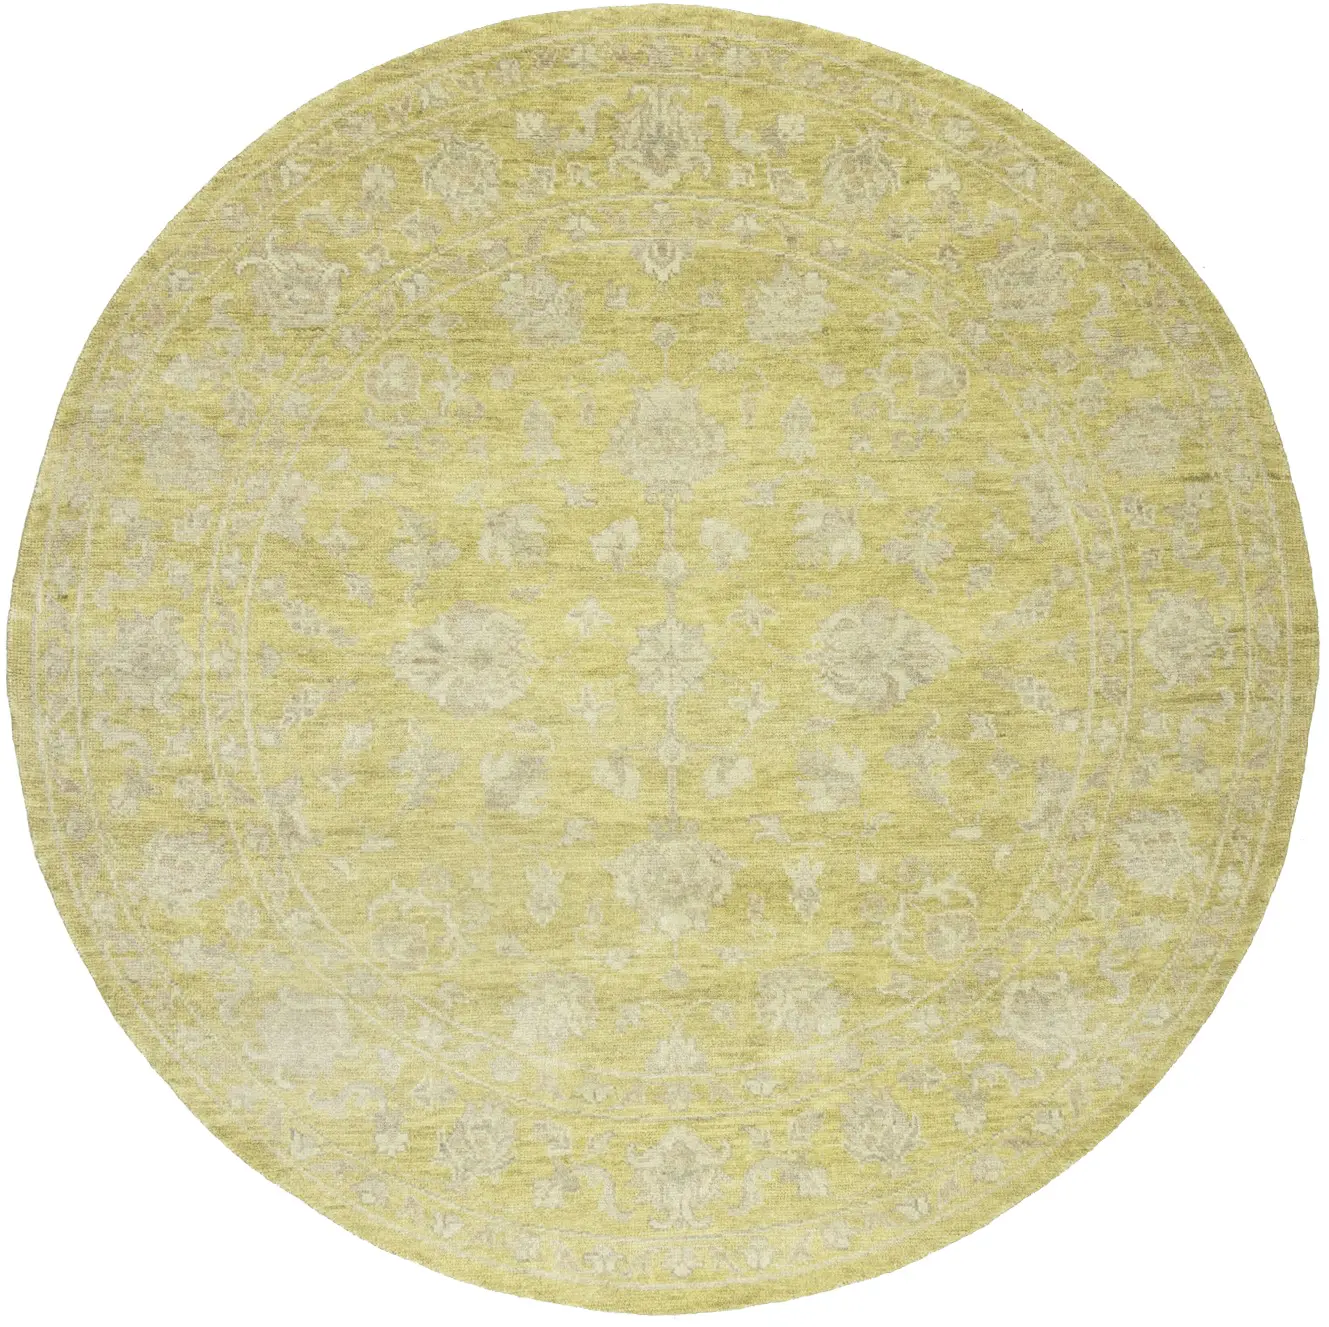 Muted Golden Yellow Floral 8X8 Transitional Oriental Round Rug